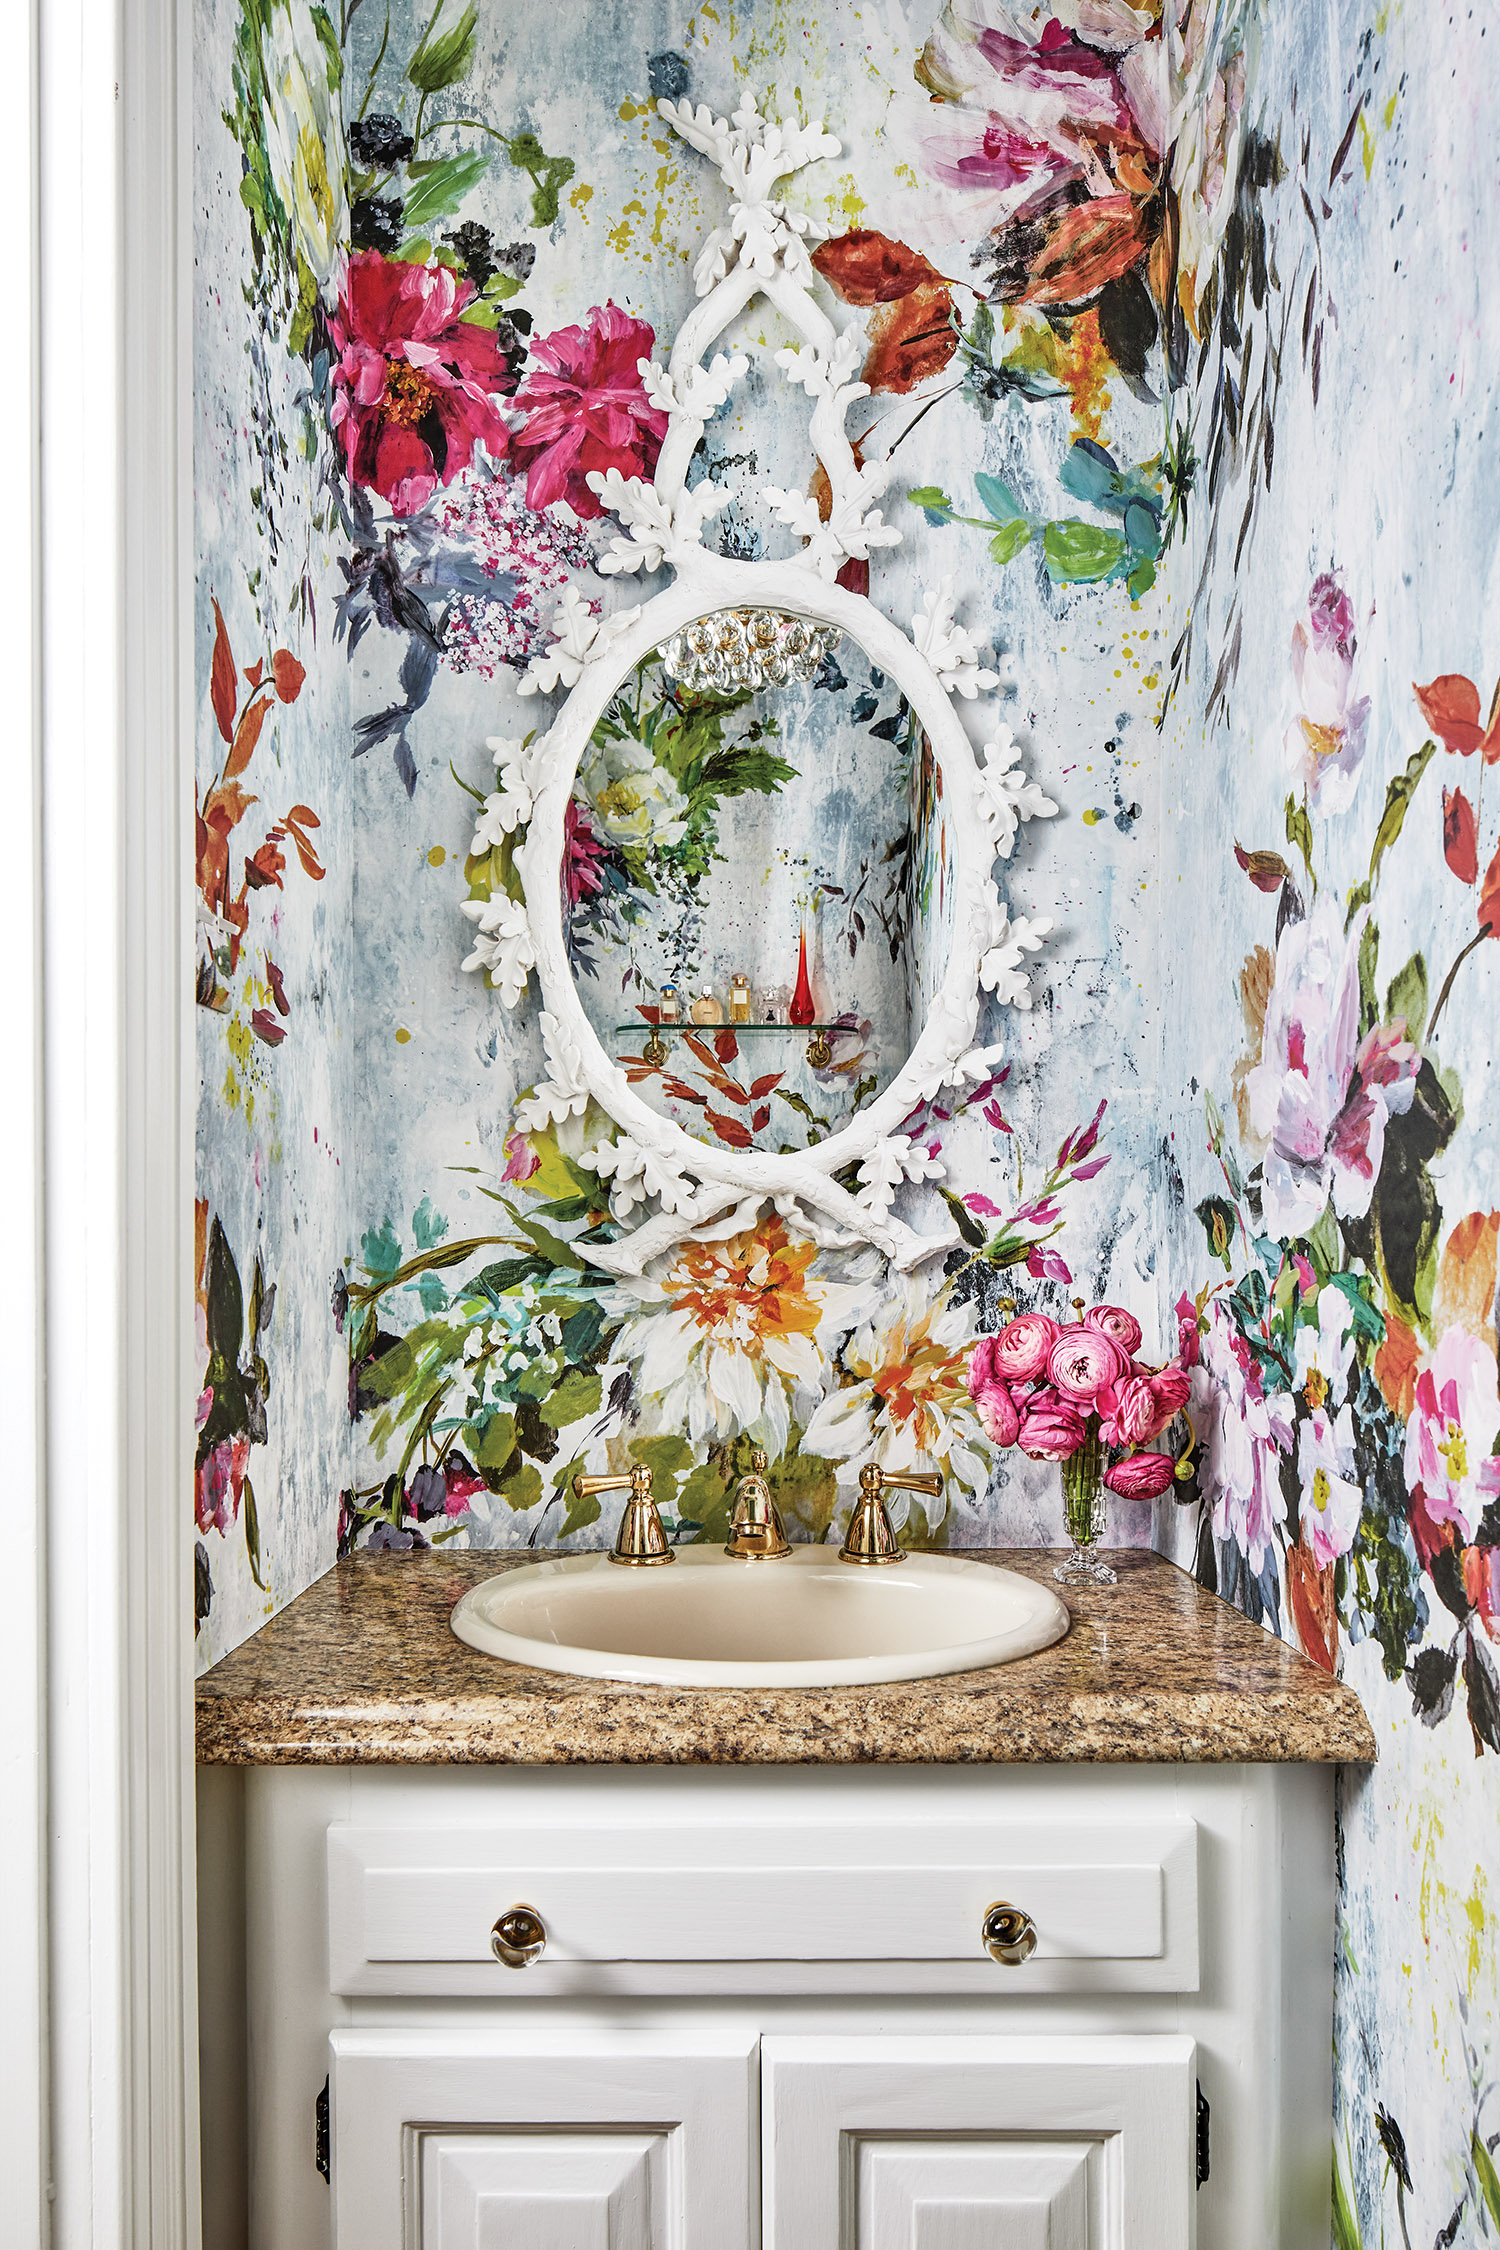 Powder room with a bold Aubriet floral wallpaper from Designer's Guild over the sink.